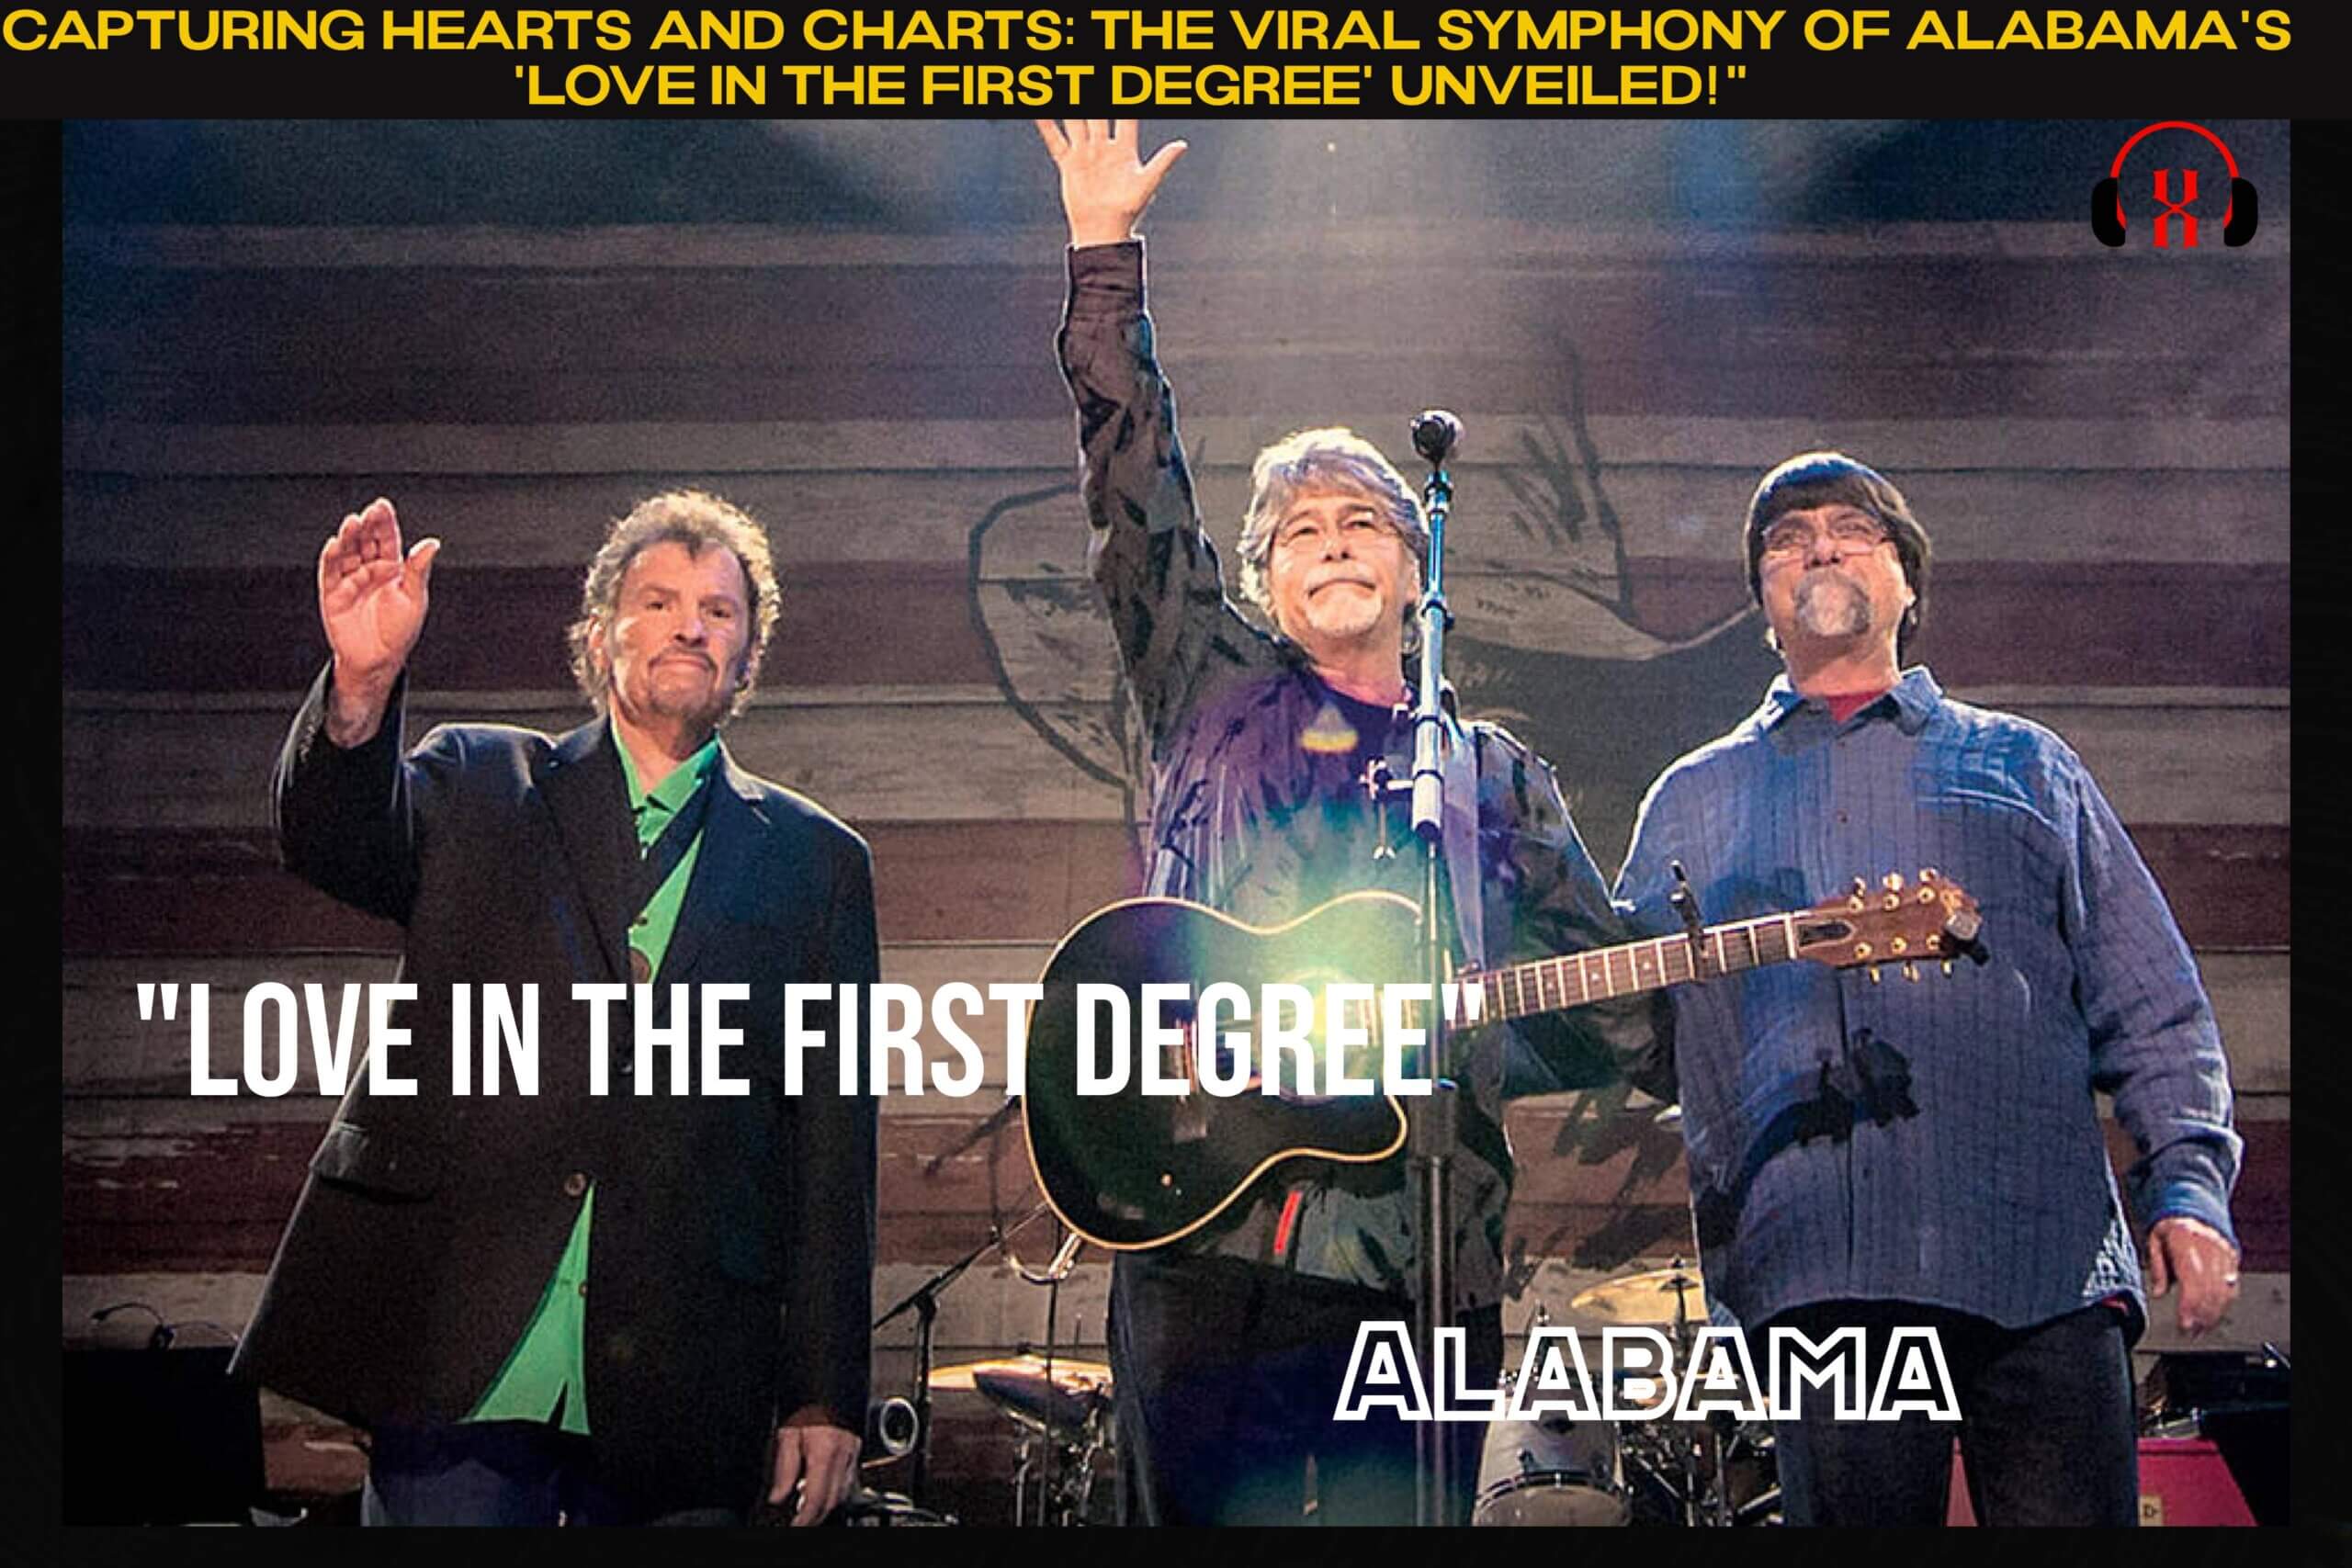 “Capturing Hearts and Charts: The Viral Symphony of Alabama’s ‘Love In the First Degree’ Unveiled!”